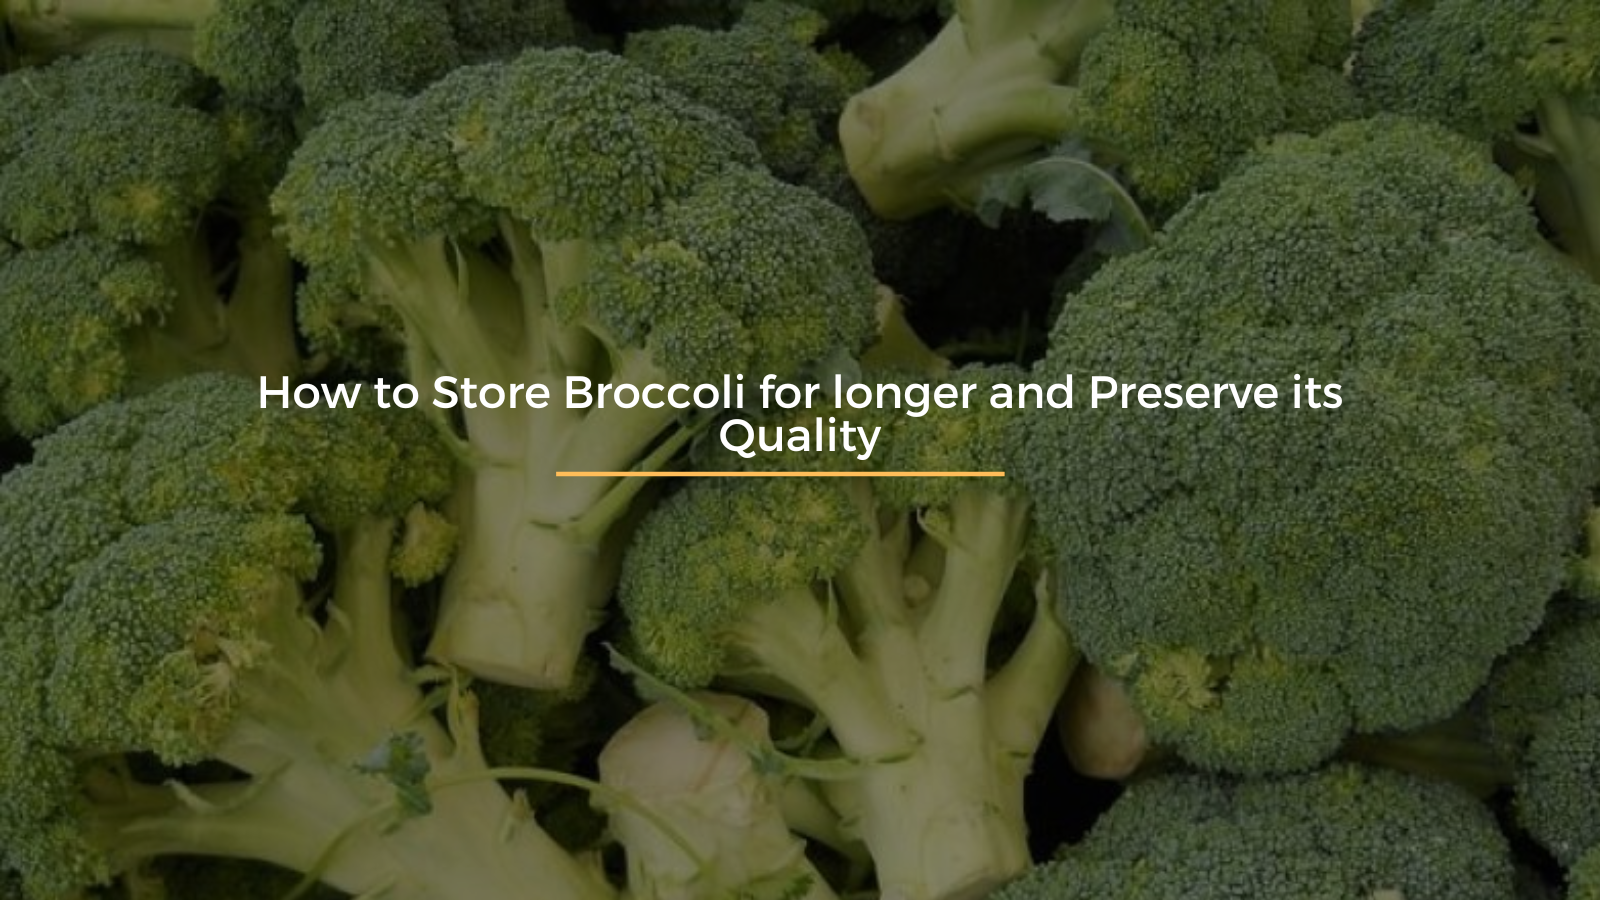 How to Store Broccoli for longer and Preserve its Quality